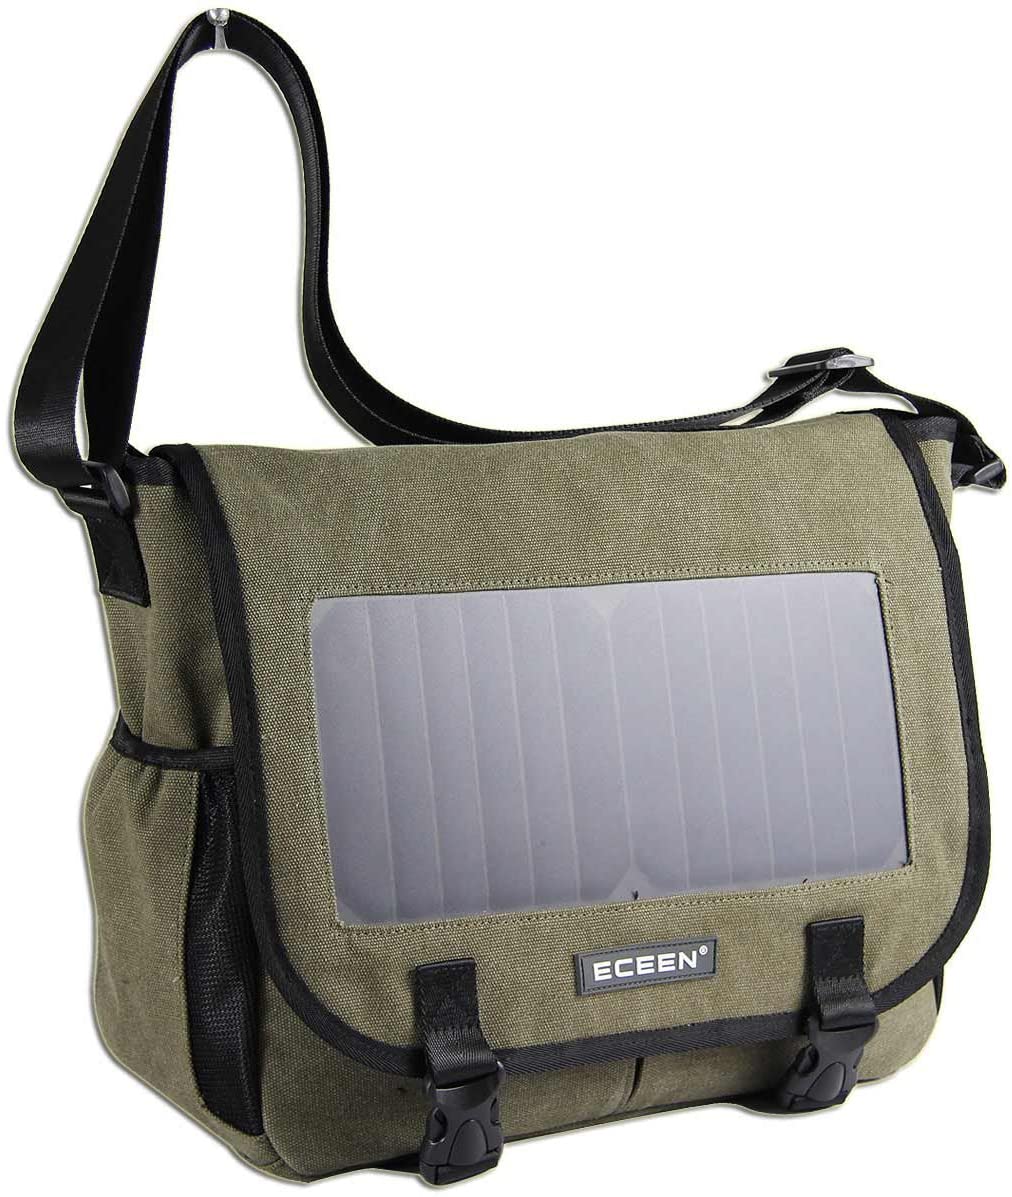 Solar Power Shoulder Briefcase Travel Bag with USB Device Charging Eco Environmentally Sustainable Energy Save the Planet